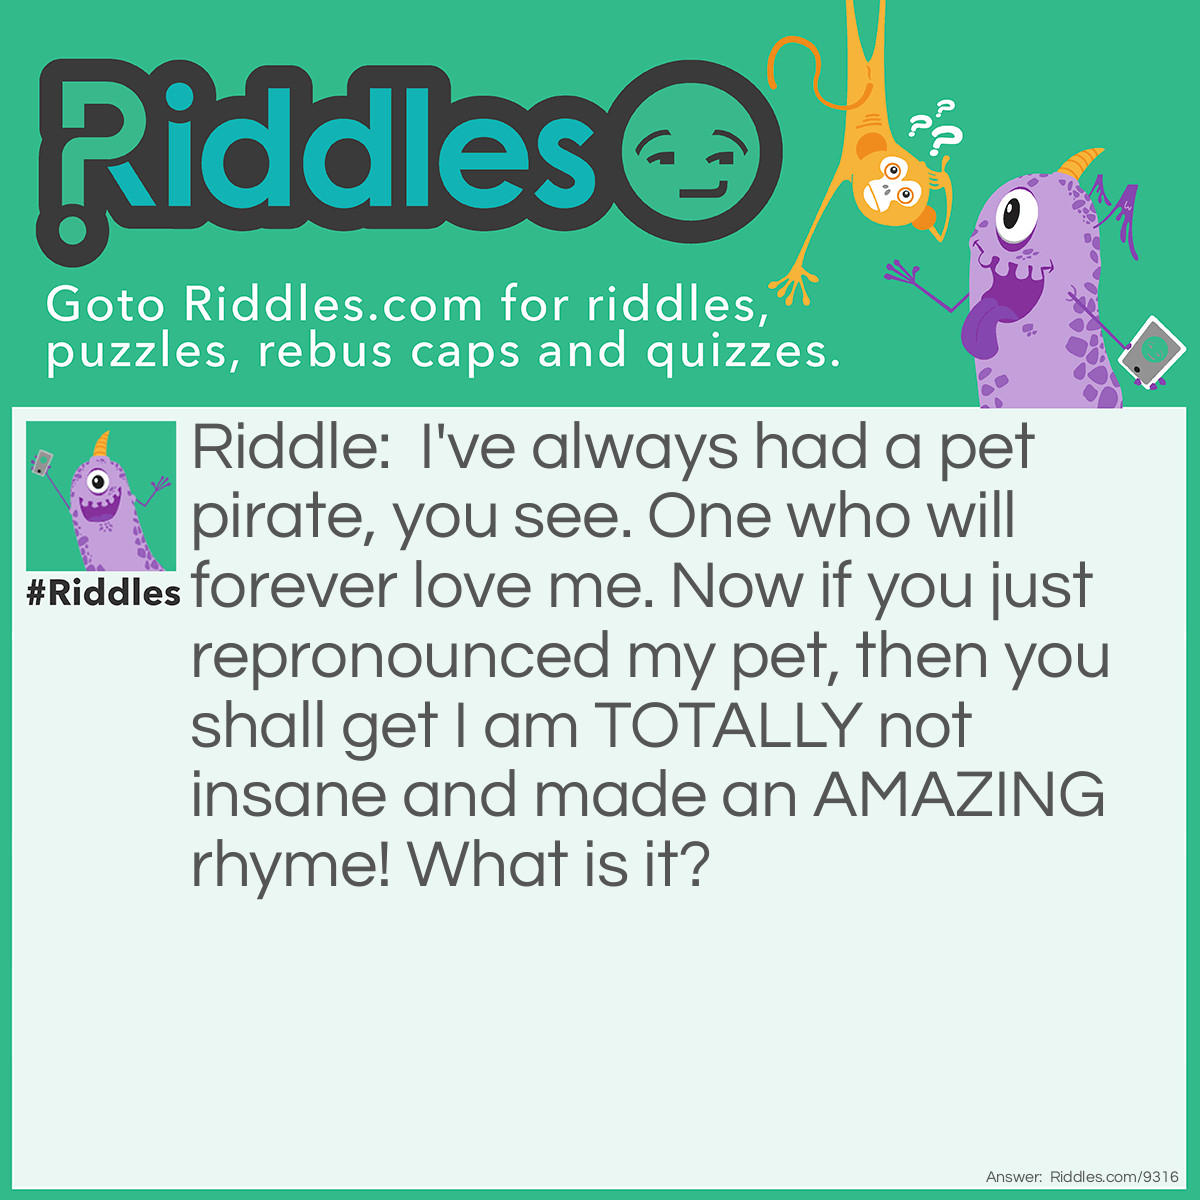 Riddle: I've always had a pet pirate, you see. One who will forever love me. Now if you just repronounced my pet, then you shall get I am TOTALLY not insane and made an AMAZING rhyme! What is it? Answer: It's a rat. Get it? A PIE RAT? Hehe.